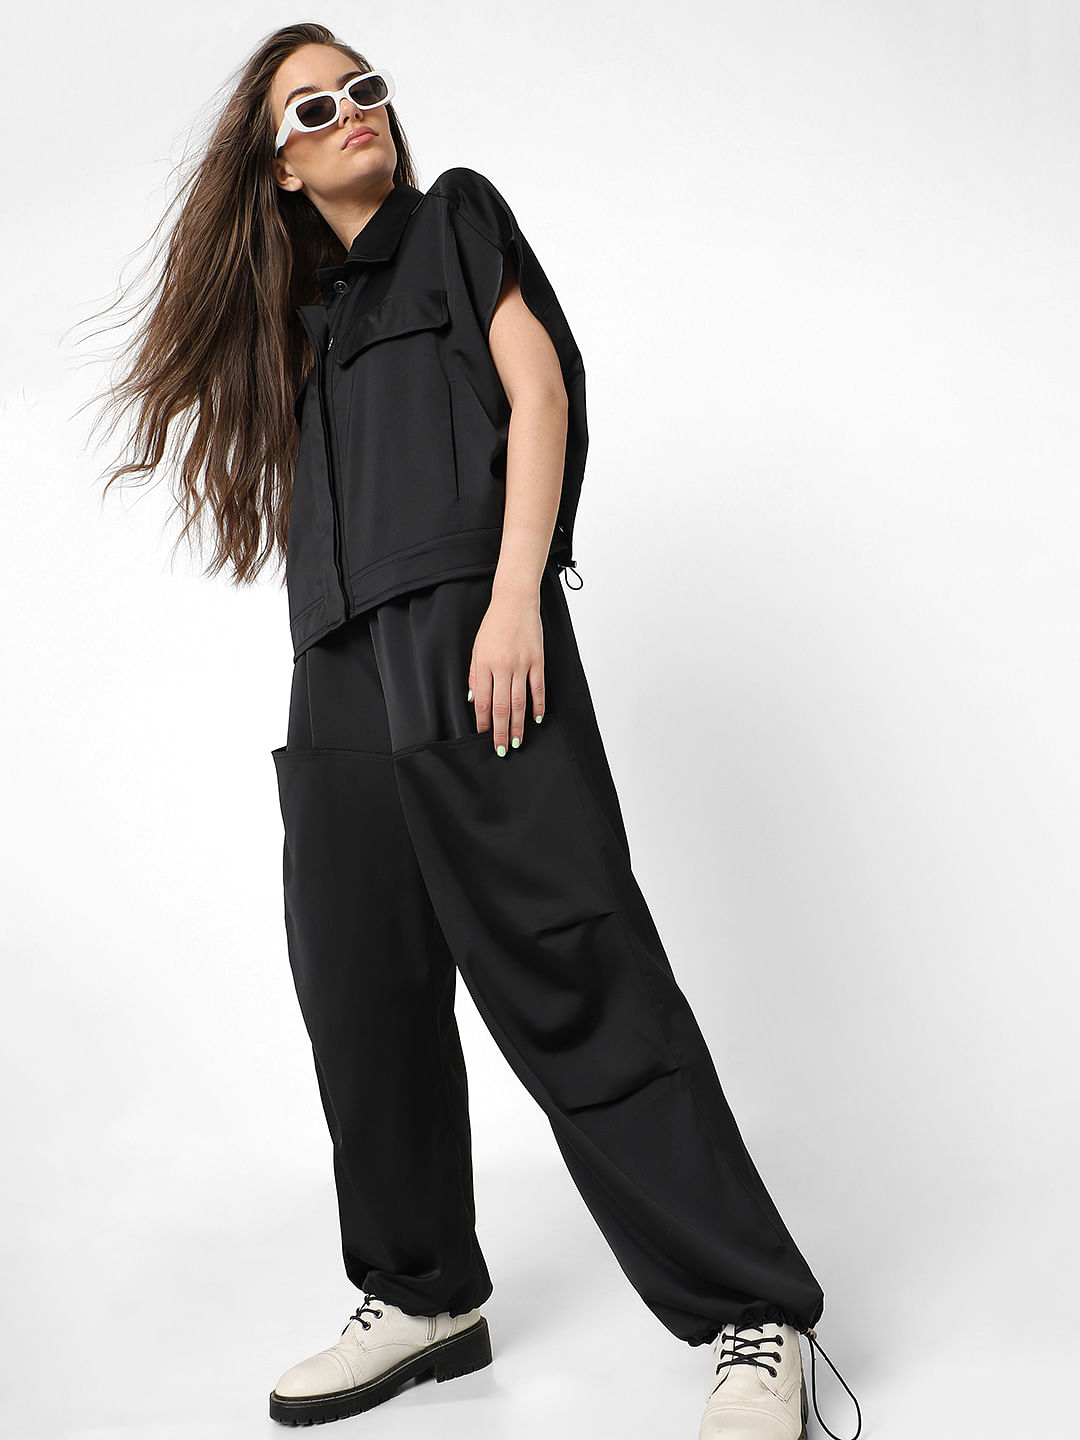 Relaxed fit cargo trousers - Women's fashion | Stradivarius Viet Nam